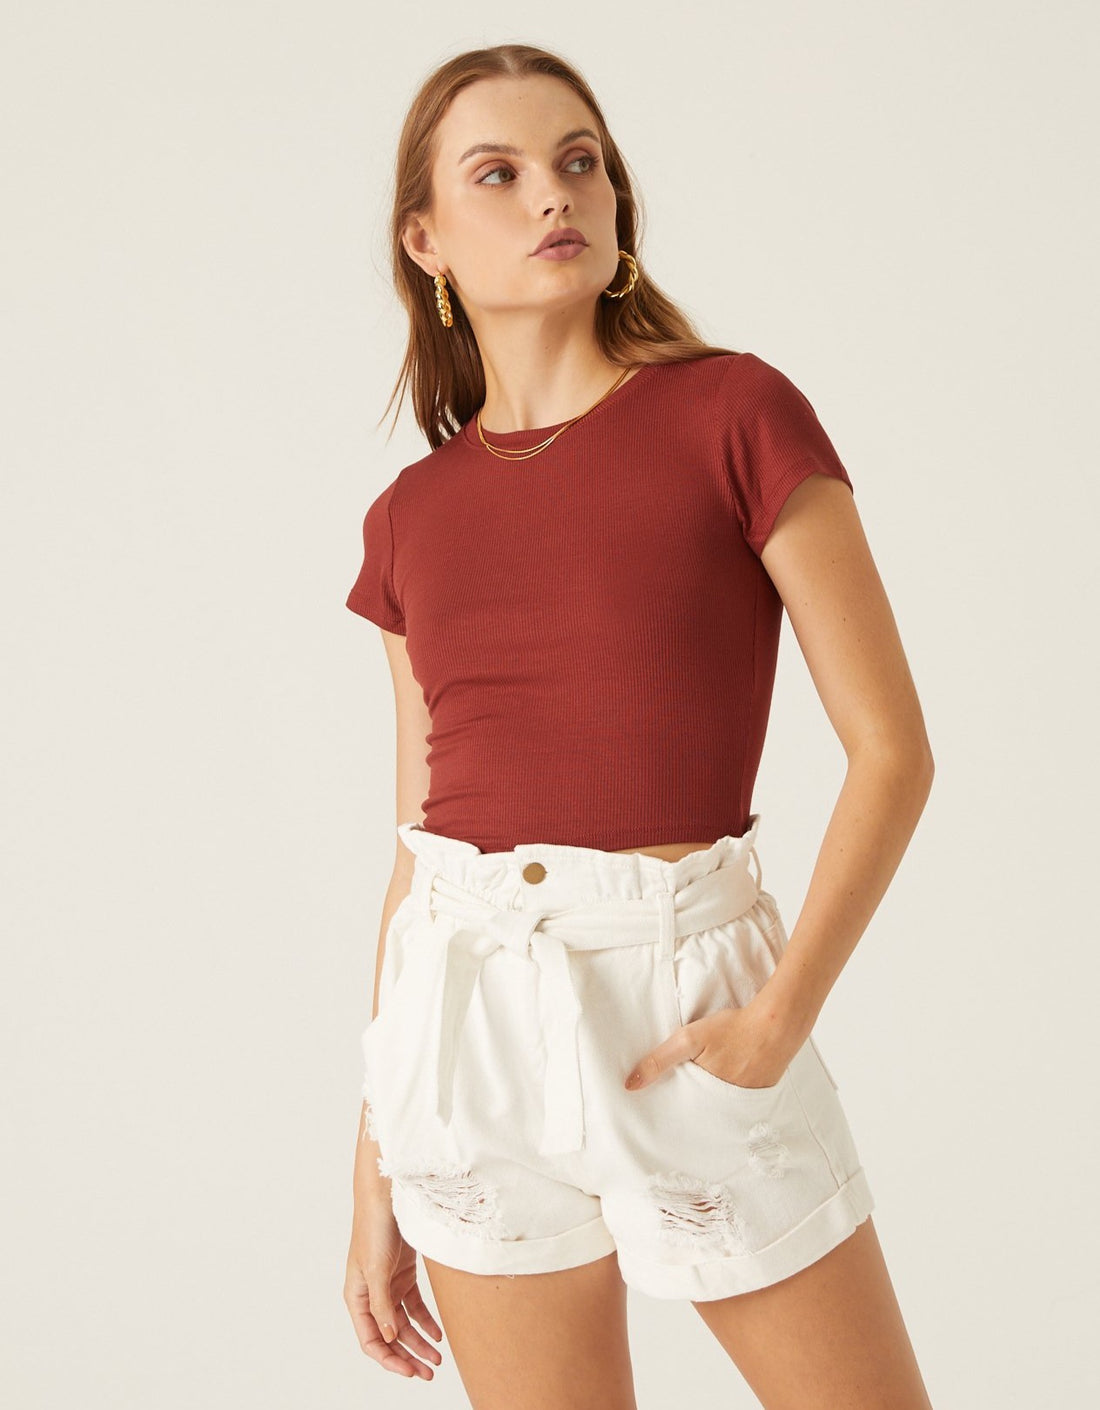 All the Way Basic Crop Tee Tops Rust Small -2020AVE